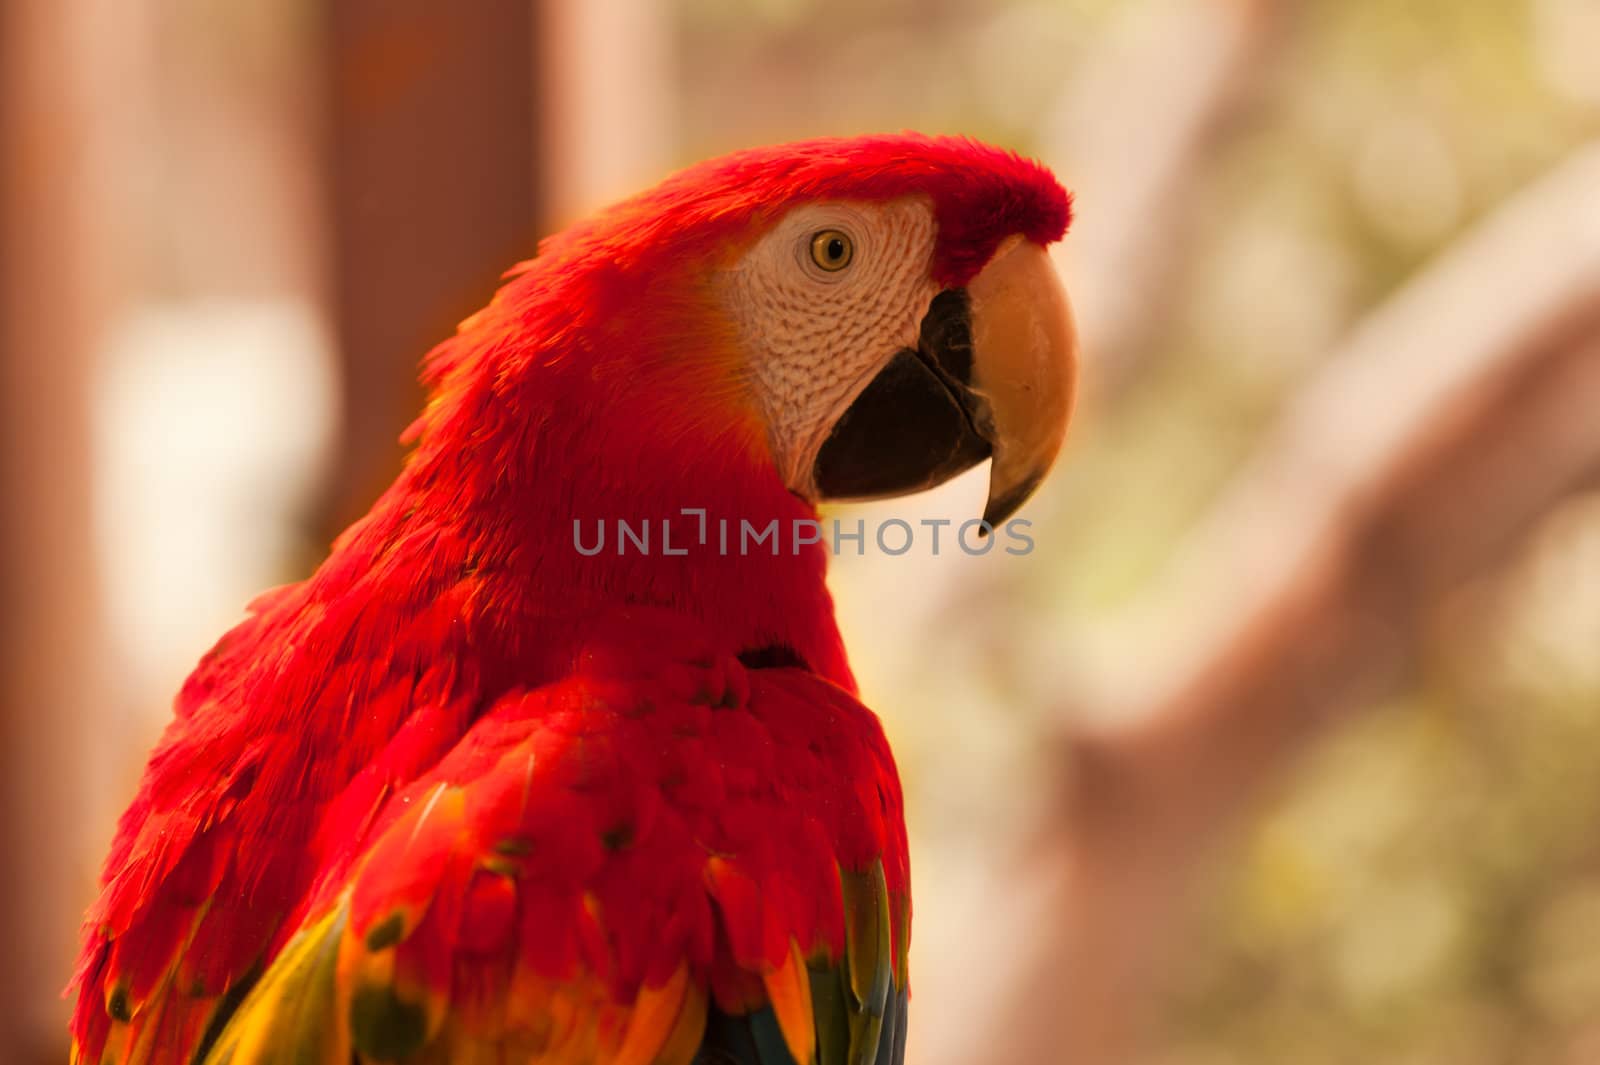 A wild red parrot on the tree